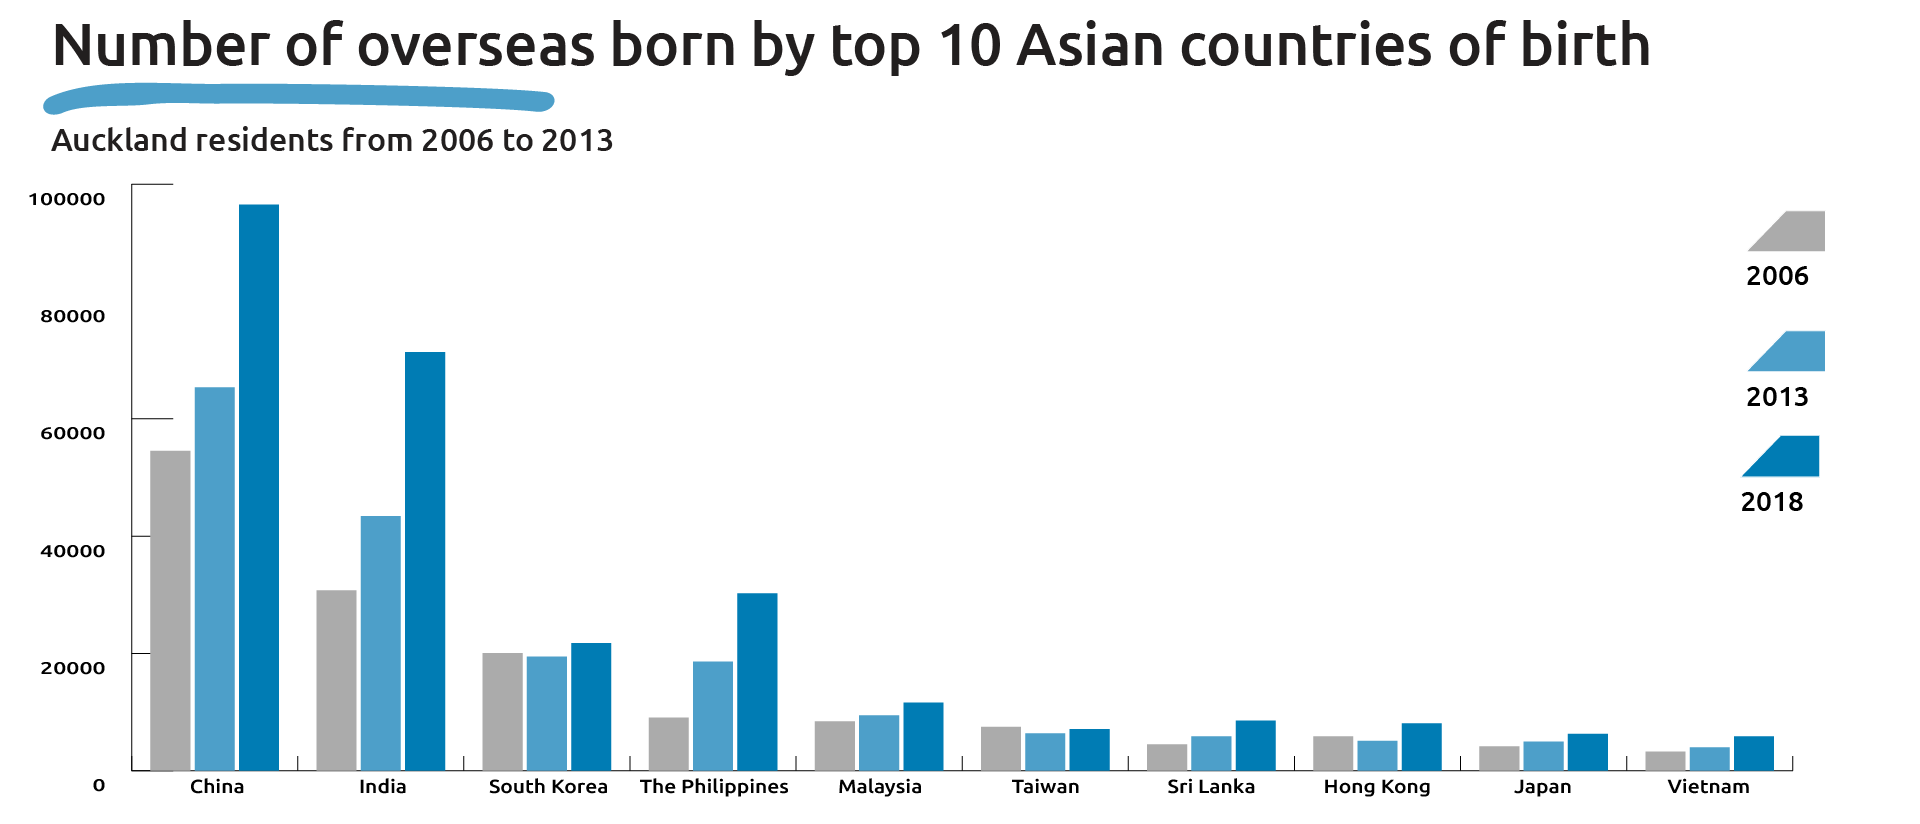 Number of overseas born by top 10 Asian countries of birth